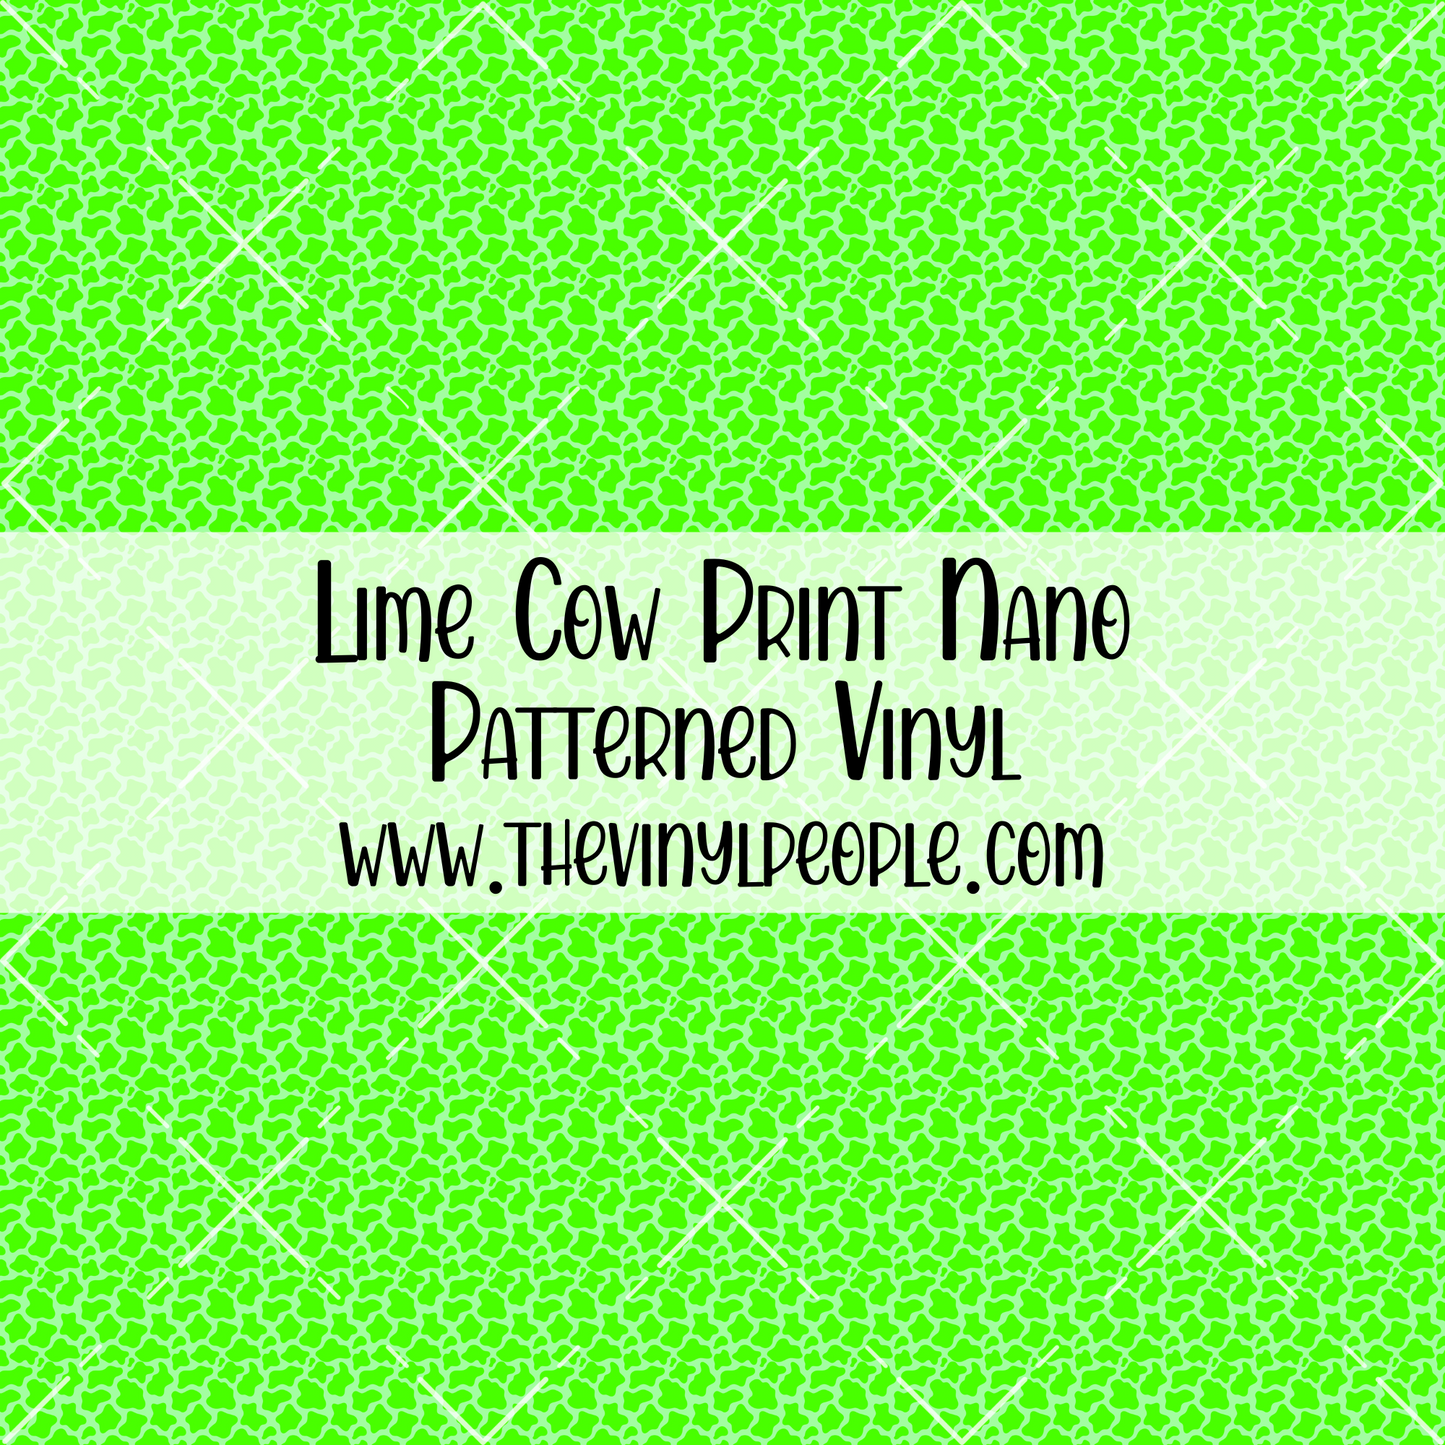 Lime Cow Print Patterned Vinyl